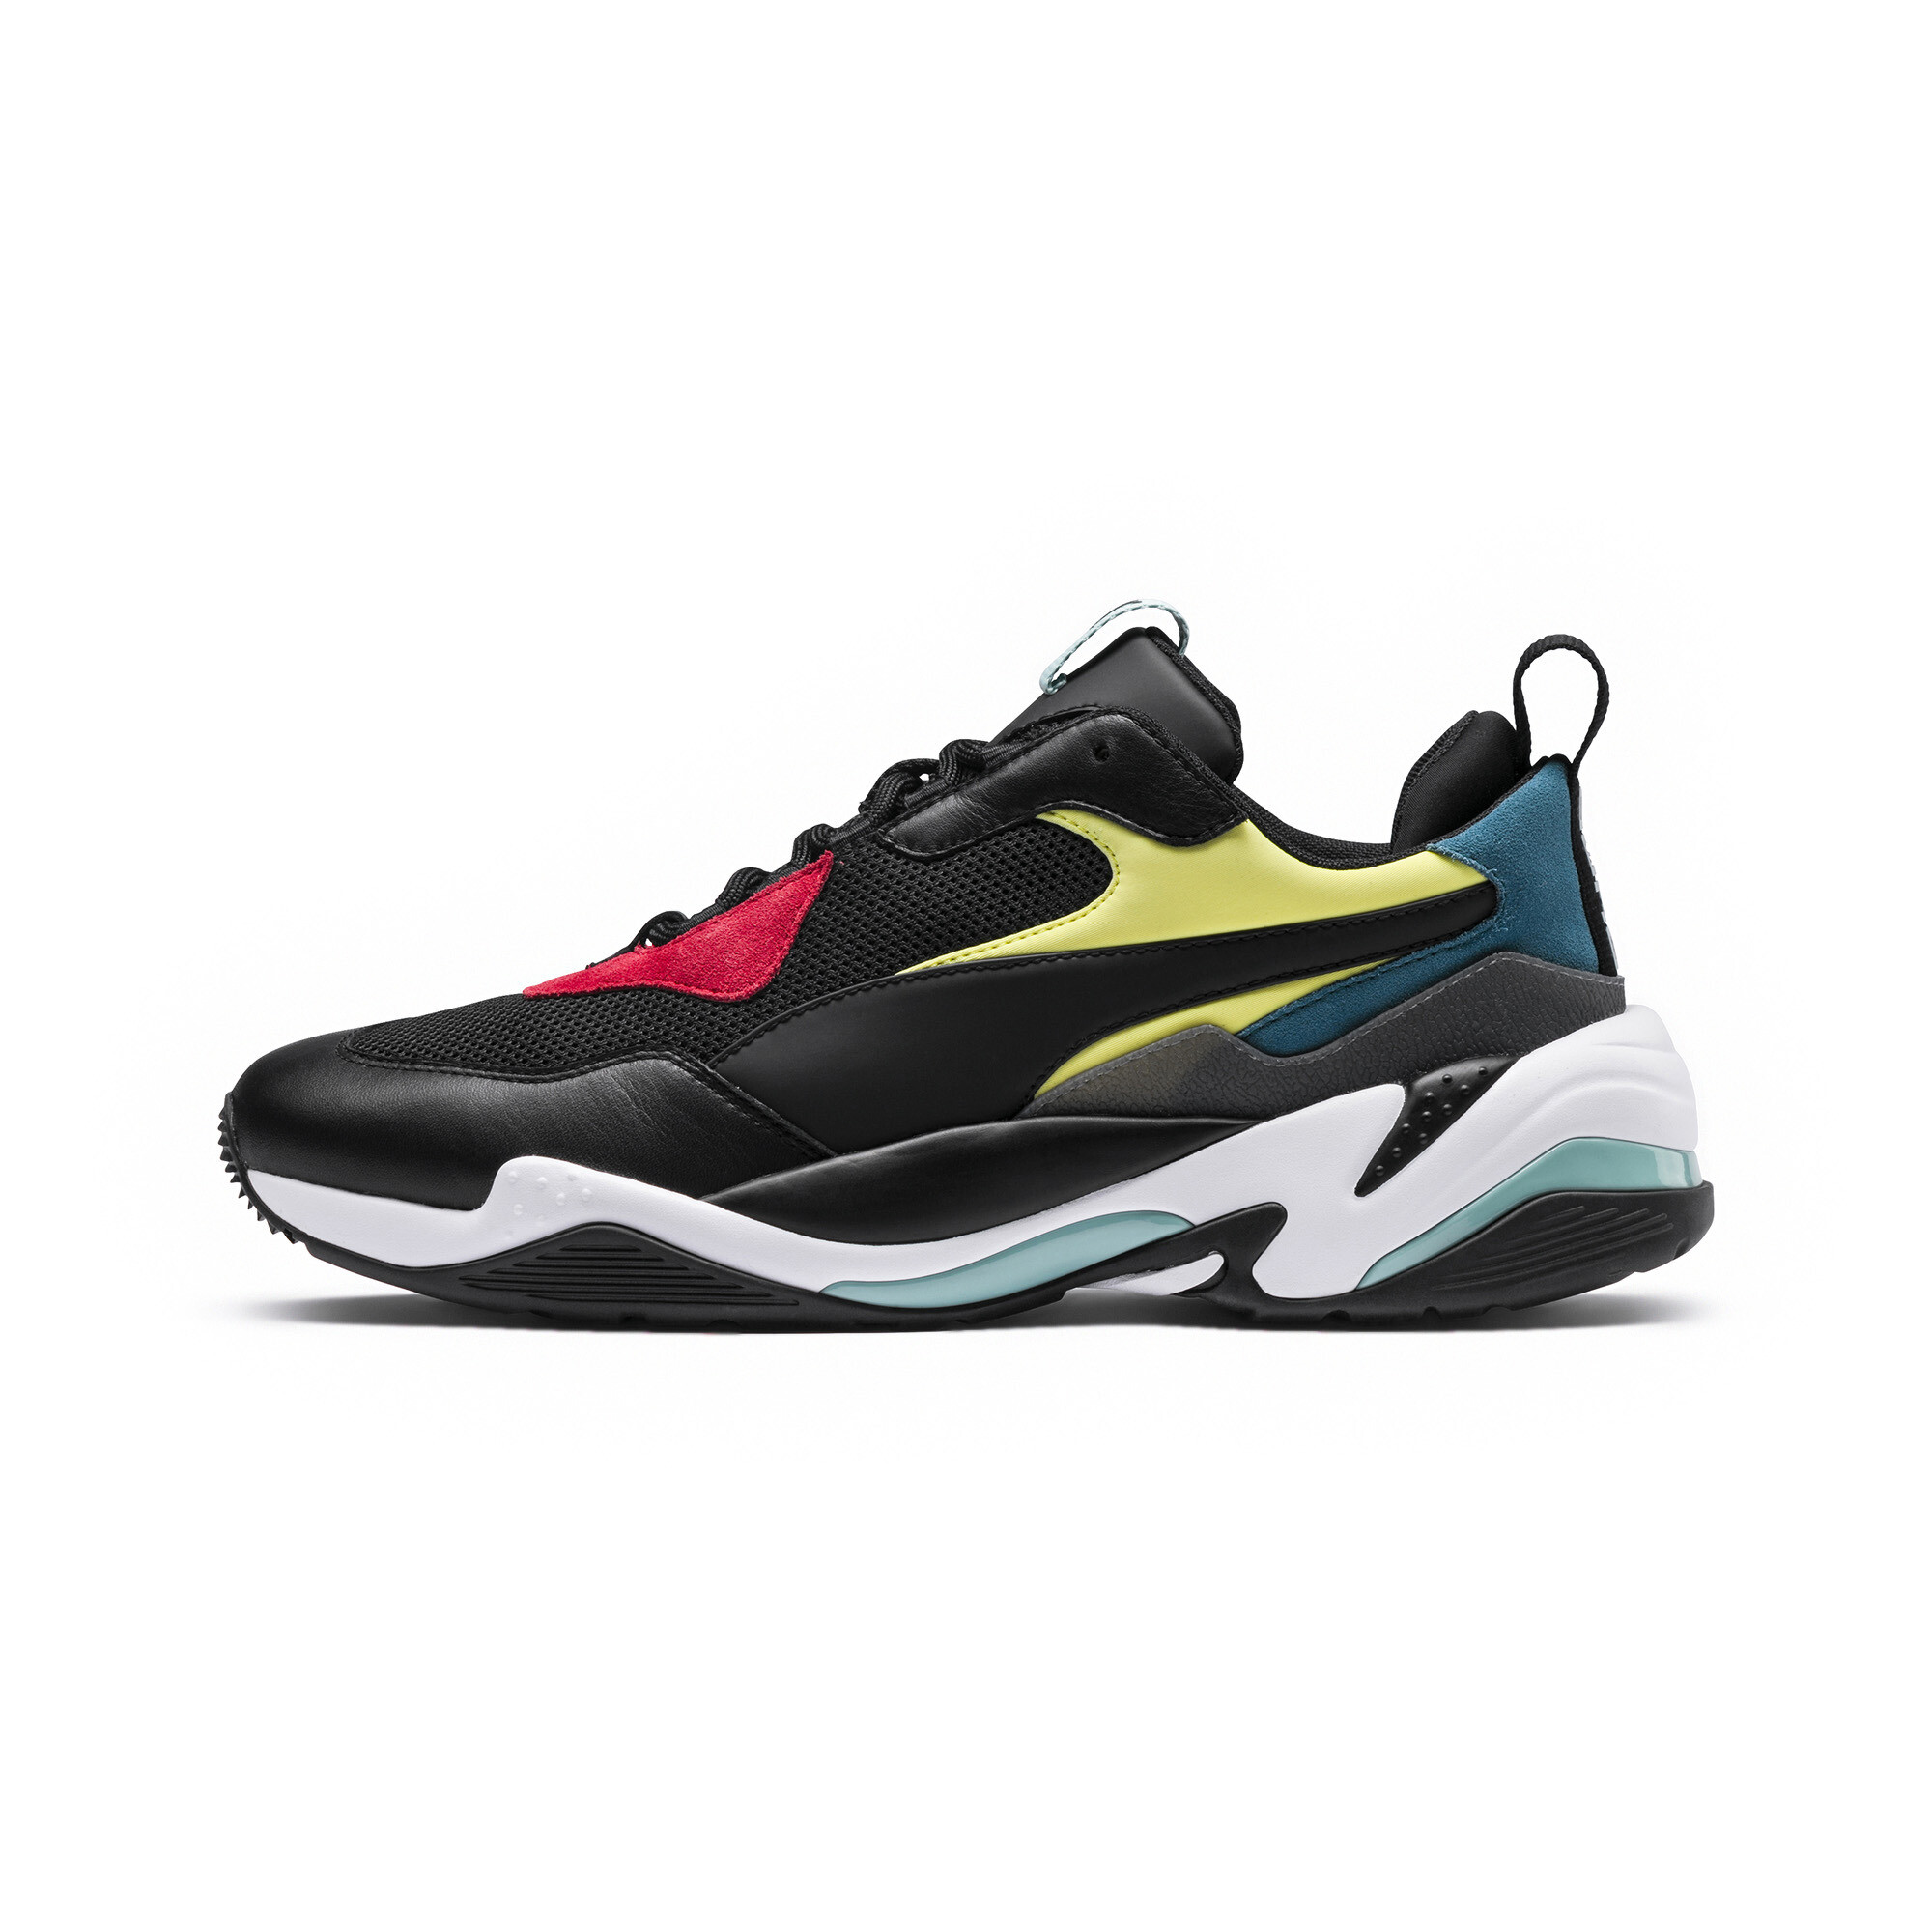 thunder spectra sneakers puma